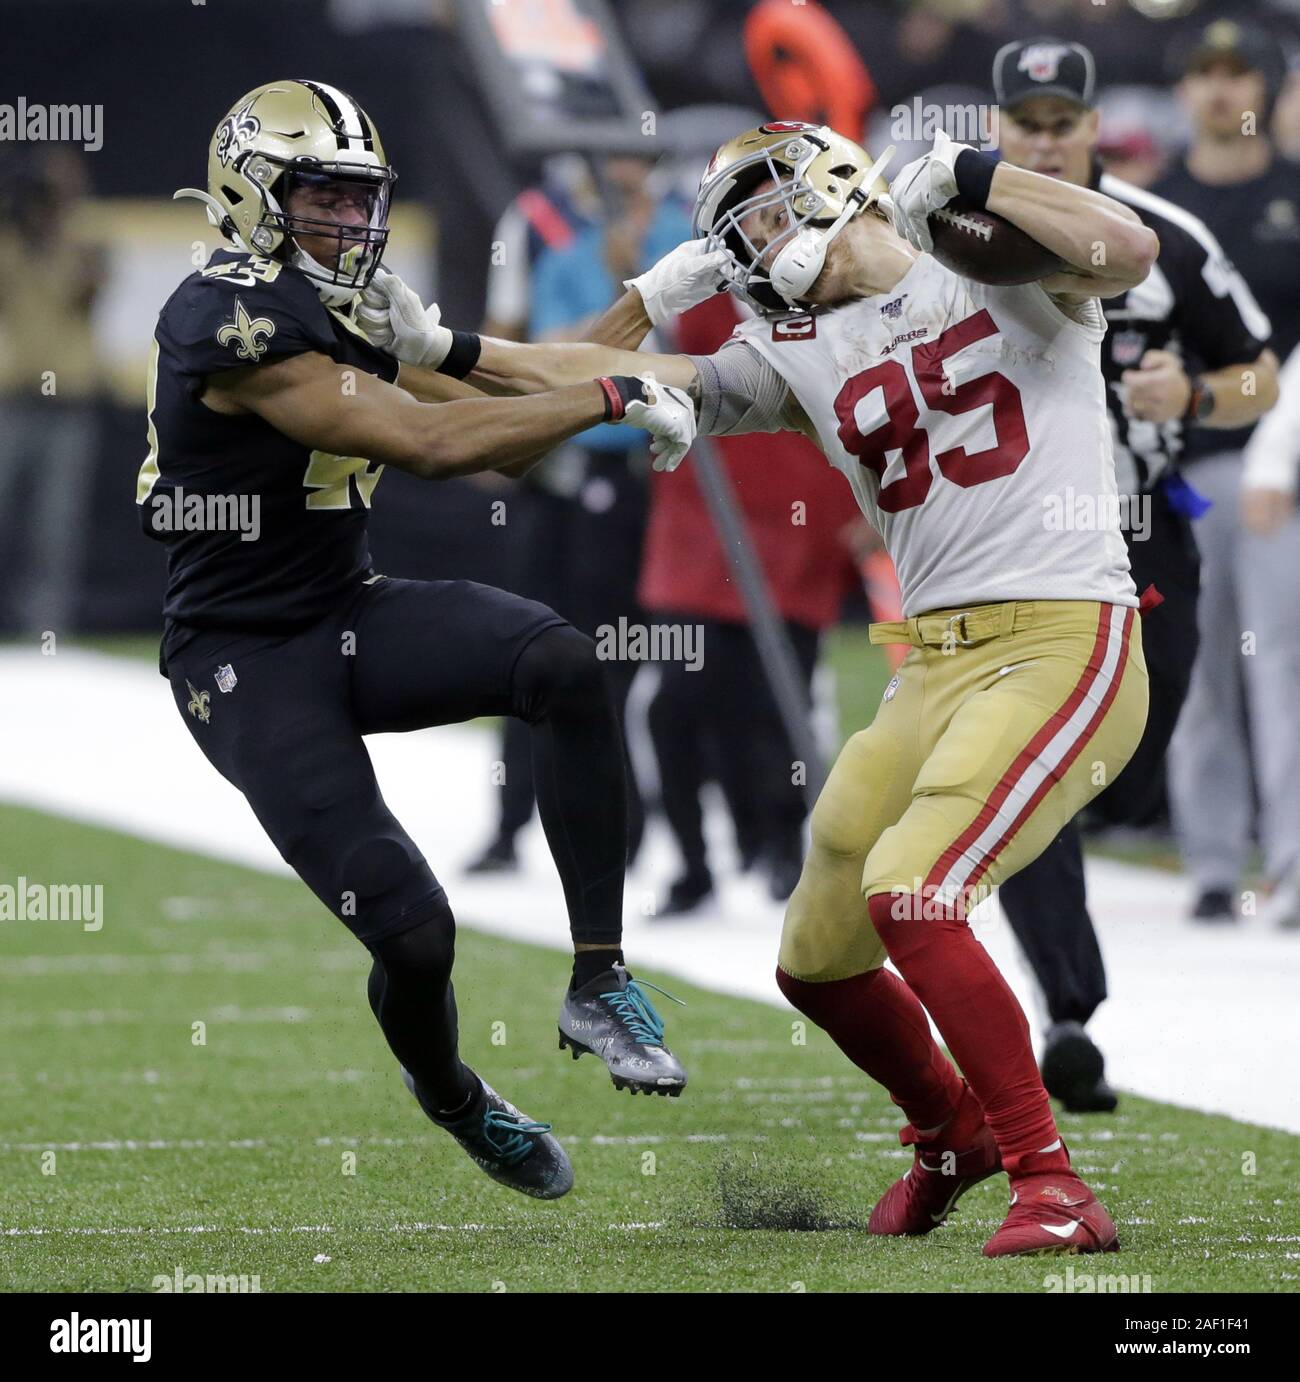 New Orleans, United States. 12th Dec, 2019. With seconds left on the clock,  San Francisco 49ers tight end George Kittle (85) picks up 39 yards and a  face mask penalty, putting the